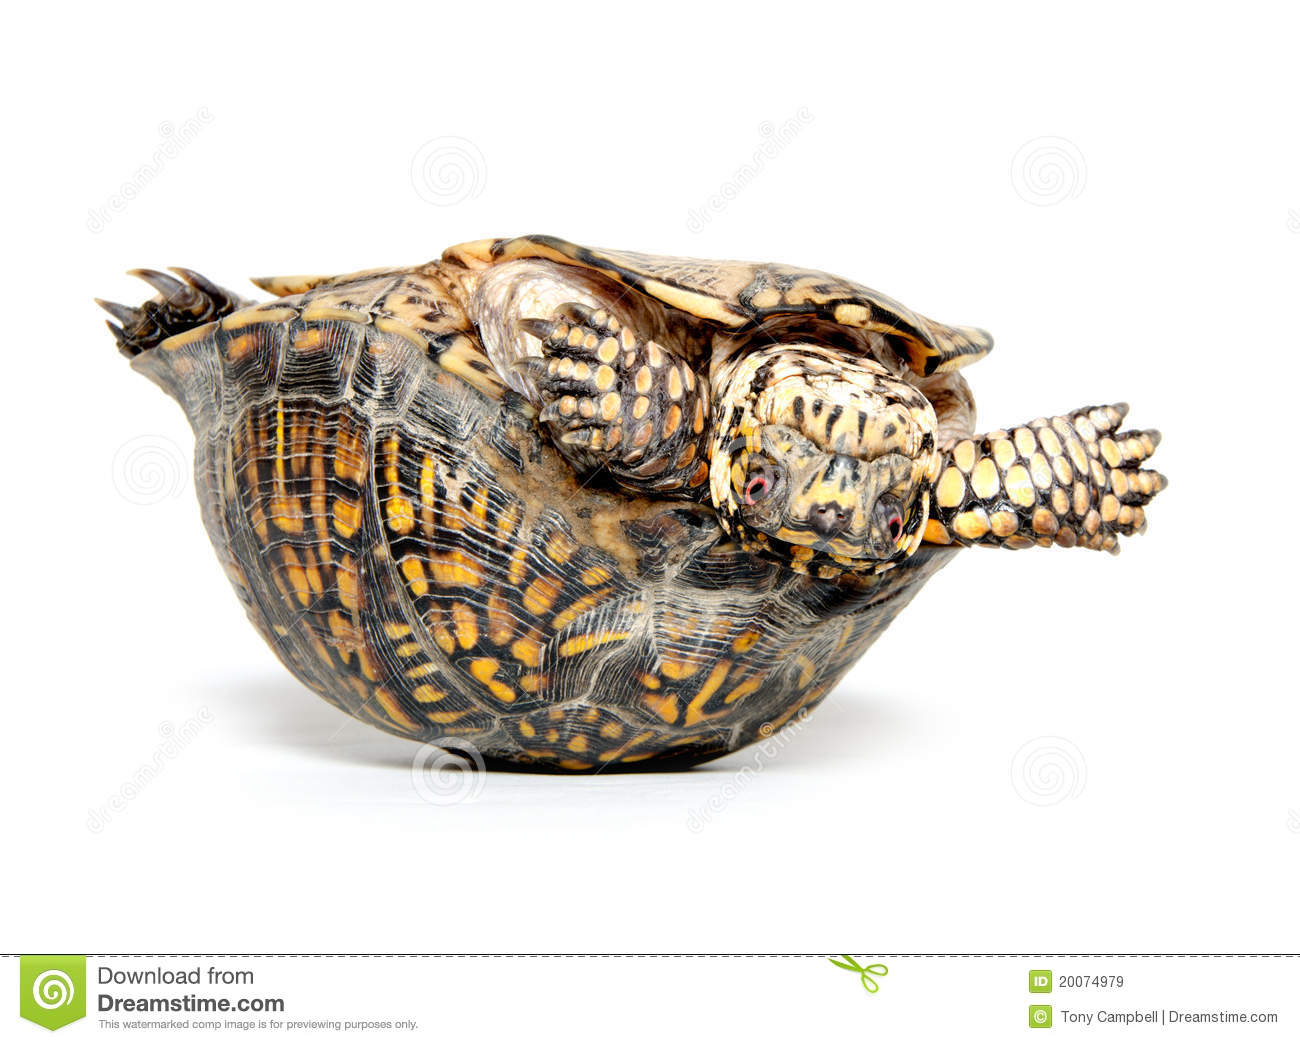 Box Turtle Upside Down Royalty Free Stock Images   Image  20074979